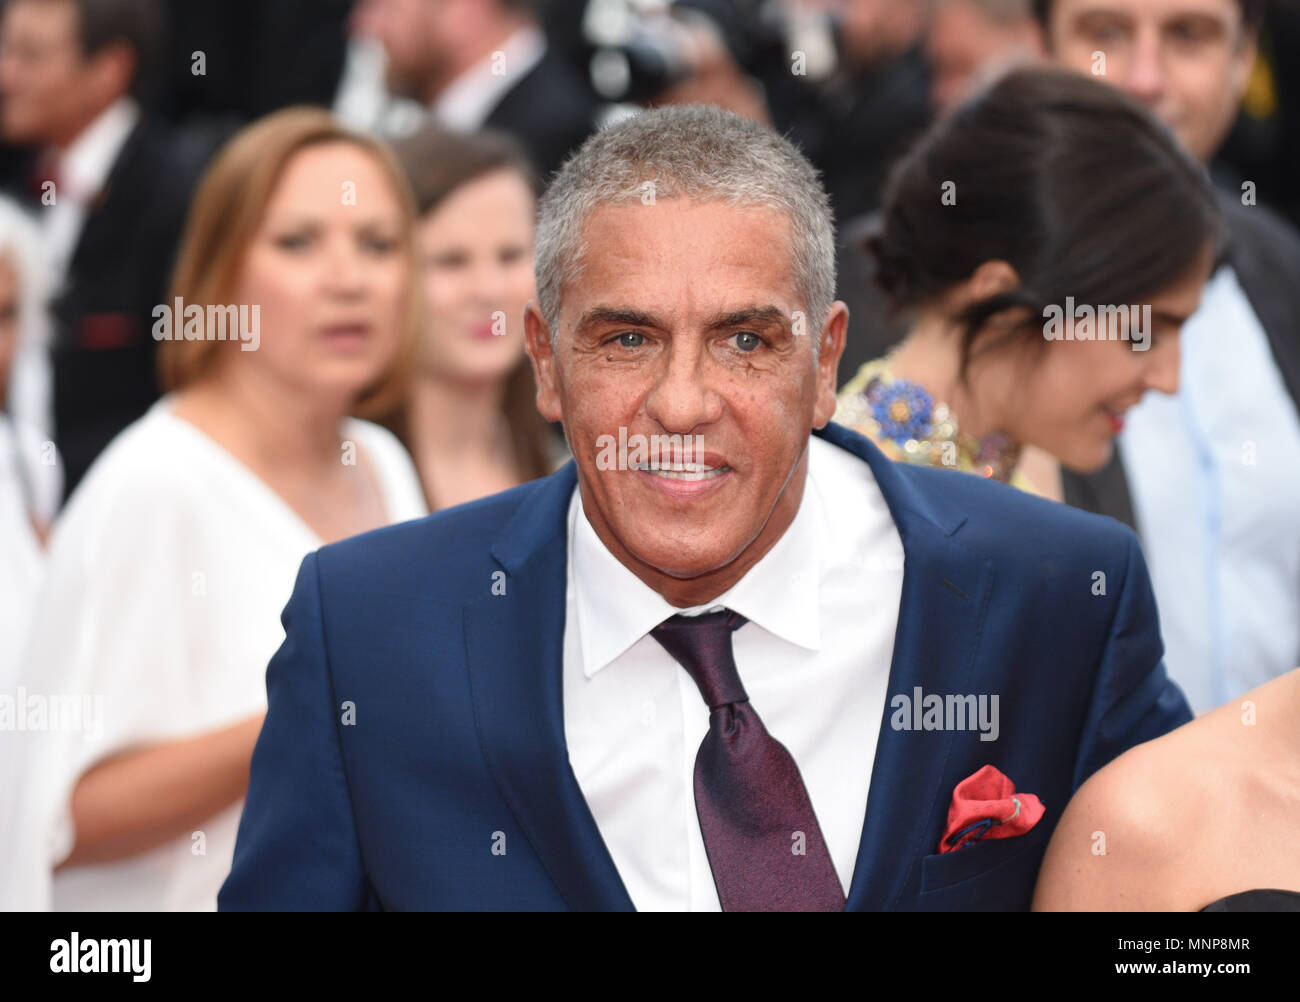 Cannes, France. 18th May, 2018. Samy Naceri attends the 'Ahlat Agaci' premiere during the 71st Cannes film festival. Credit: Idealink Photography/Alamy Live News Stock Photo